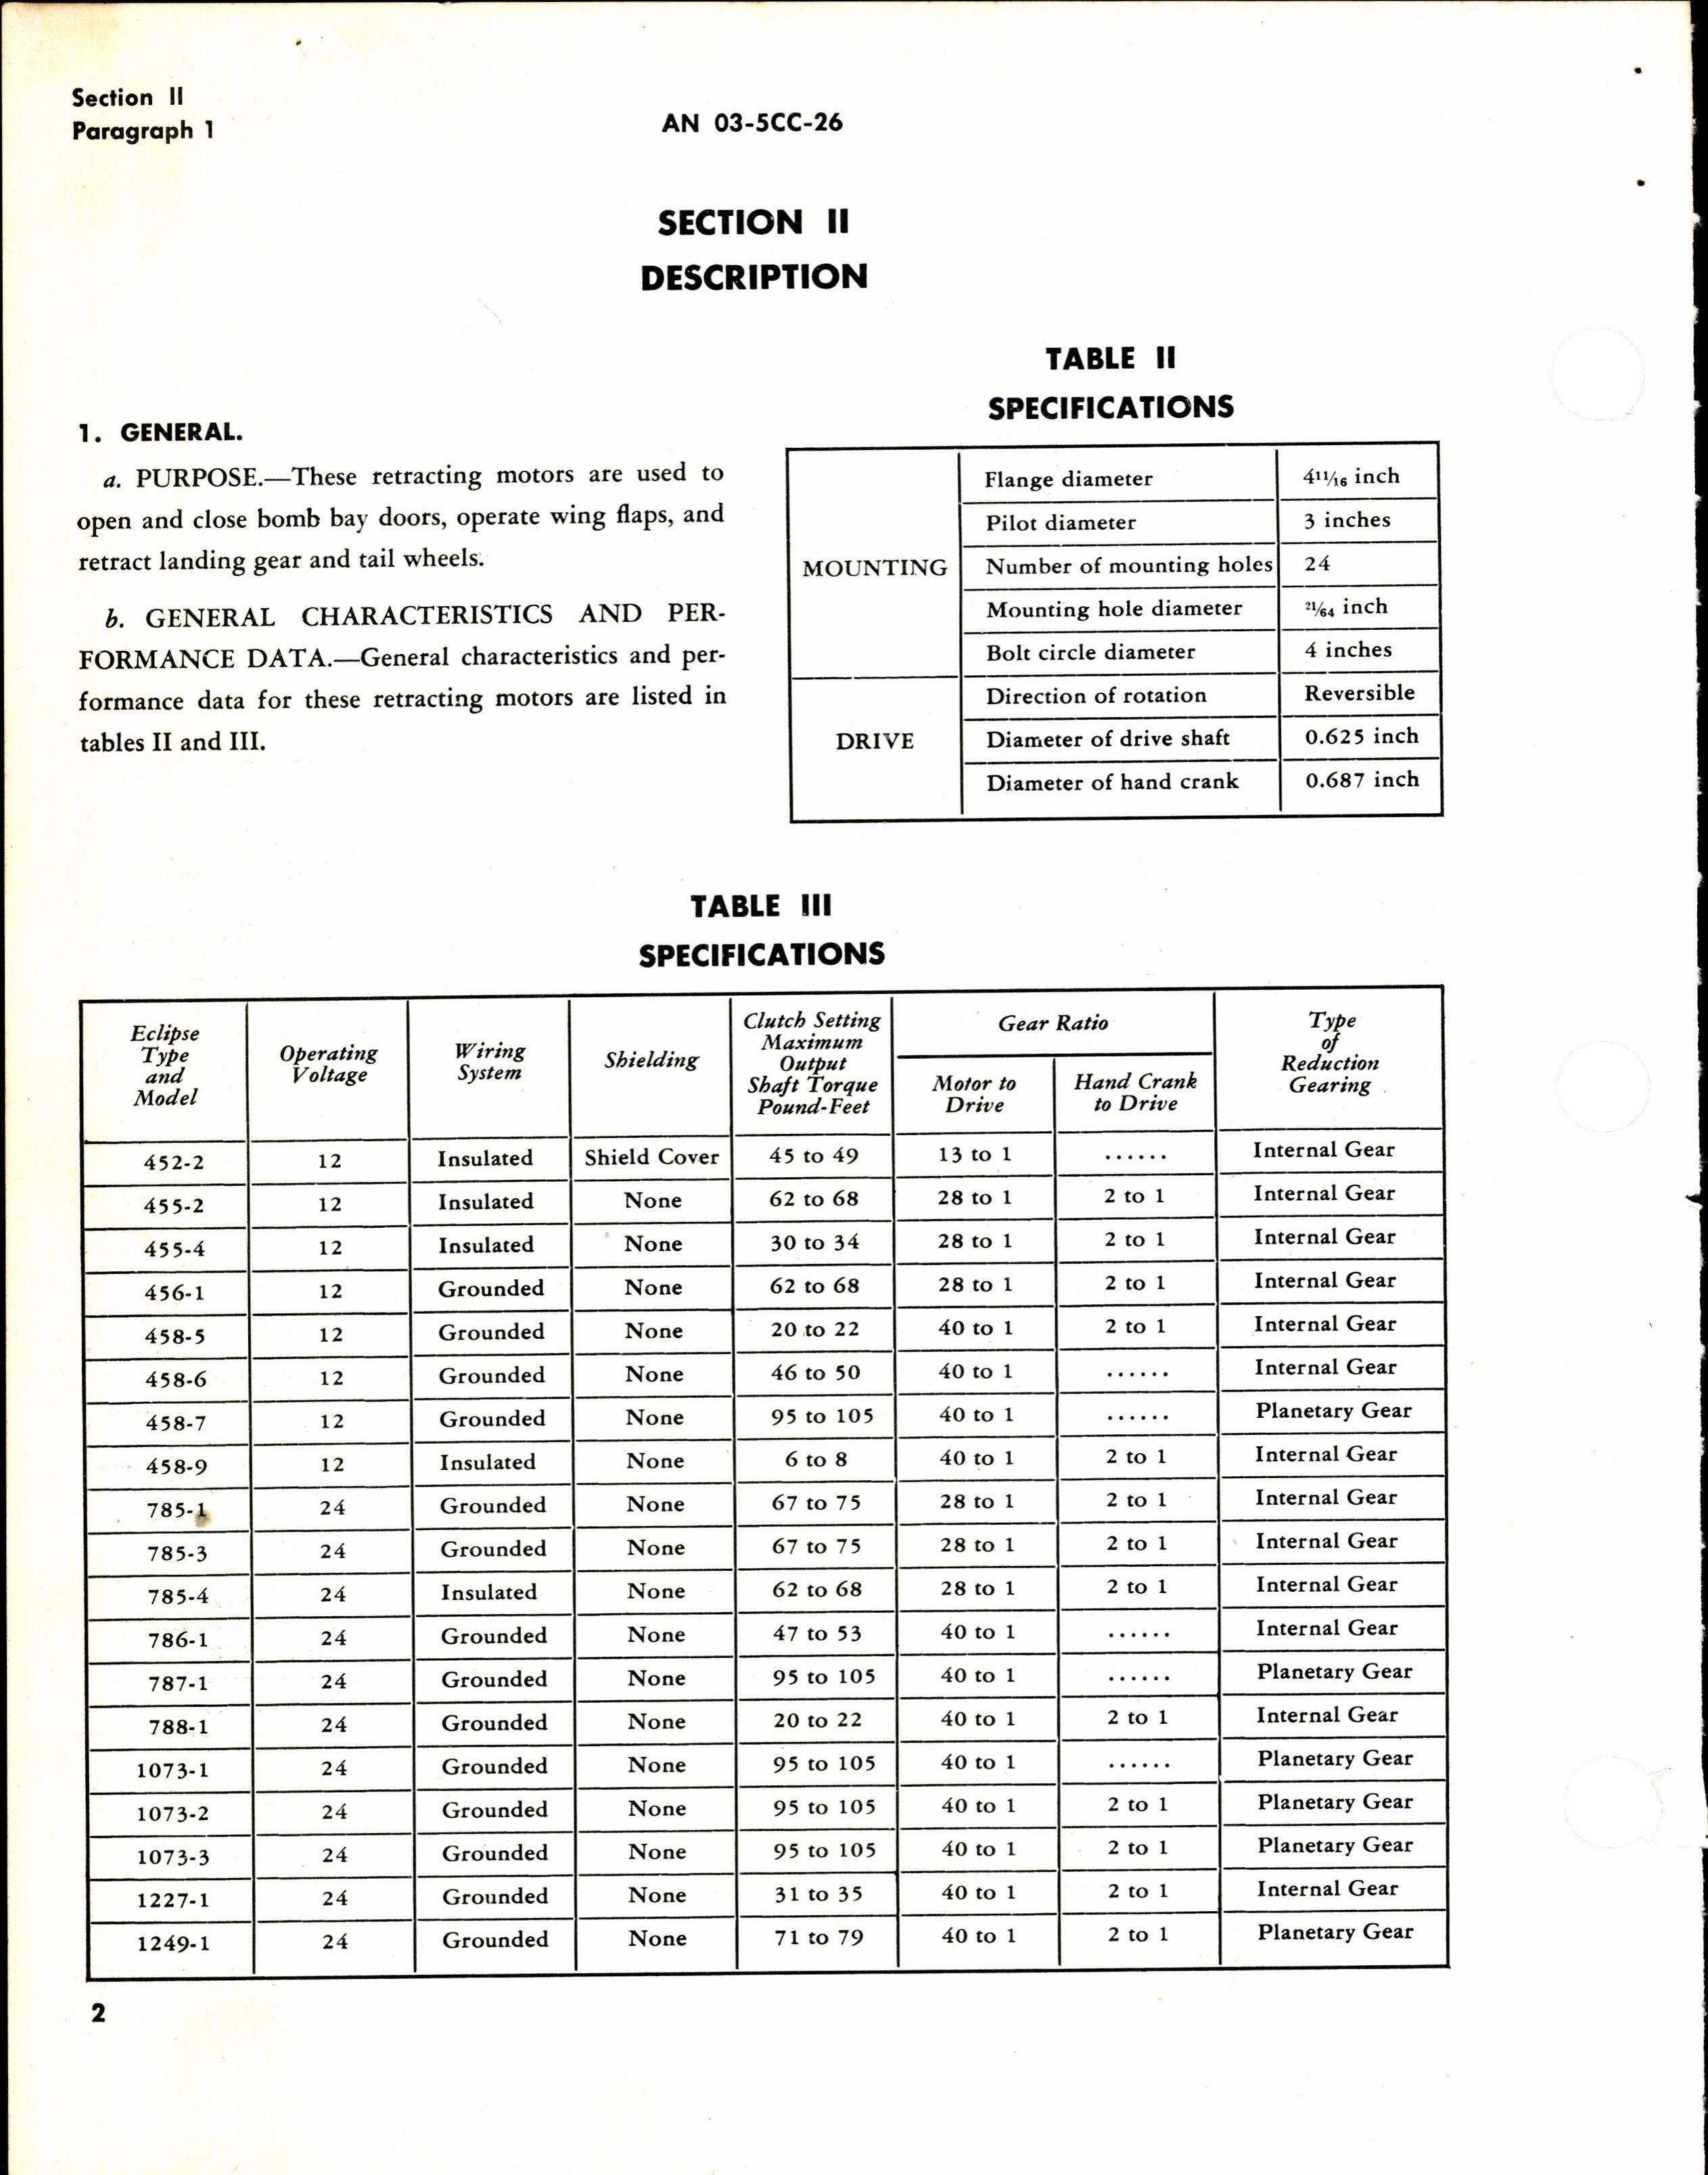 Sample page 8 from AirCorps Library document: Operation, Service, & Overhaul Inst w/ Parts Catalog for Eclipse Retracting Motors